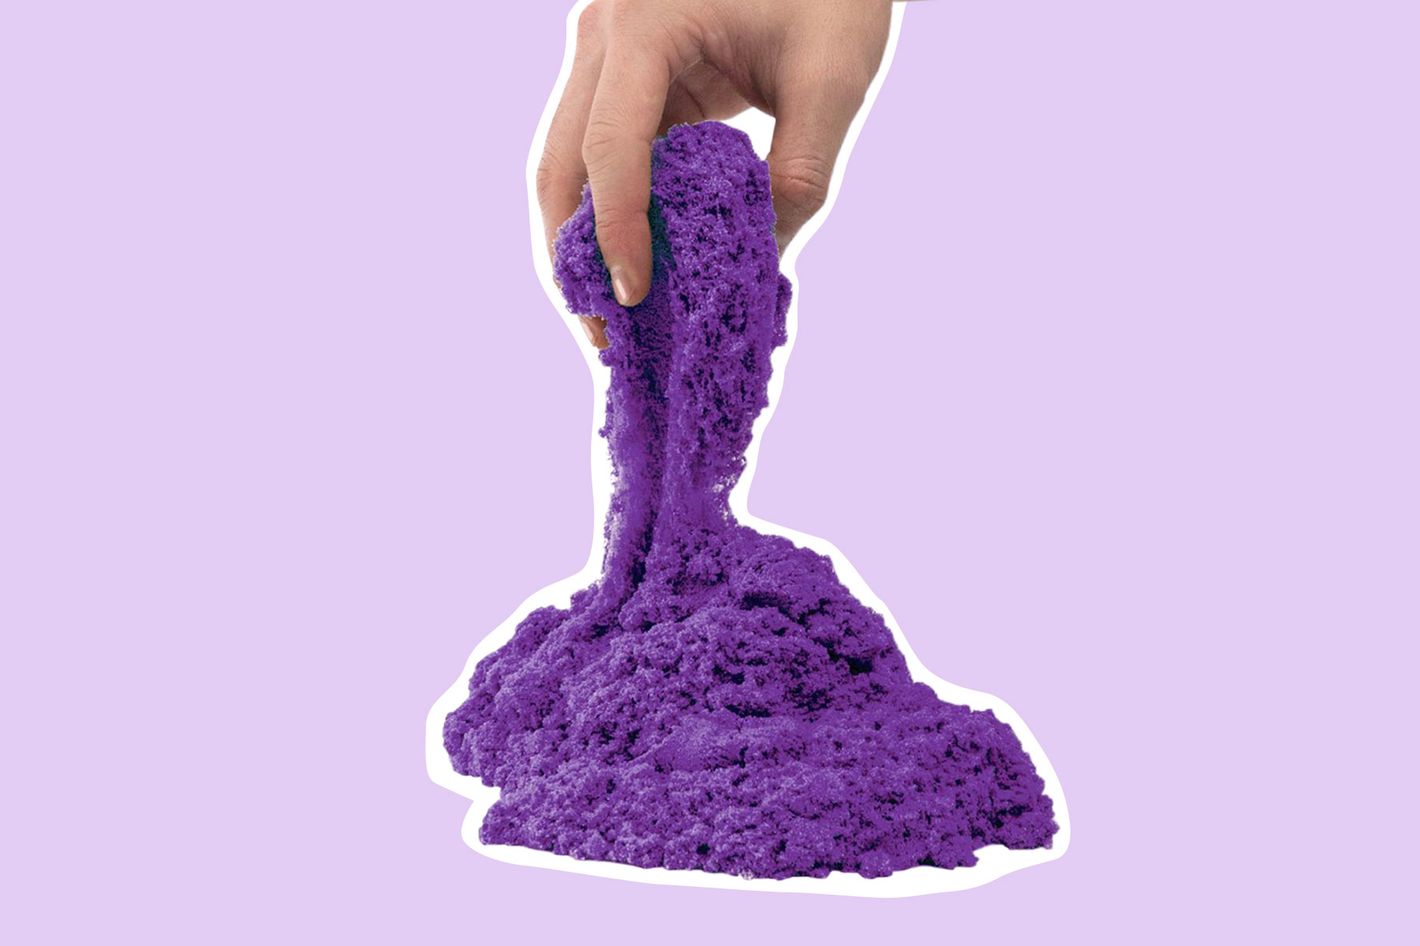 The Coolest Desk Toy Goes to Kinetic Sand